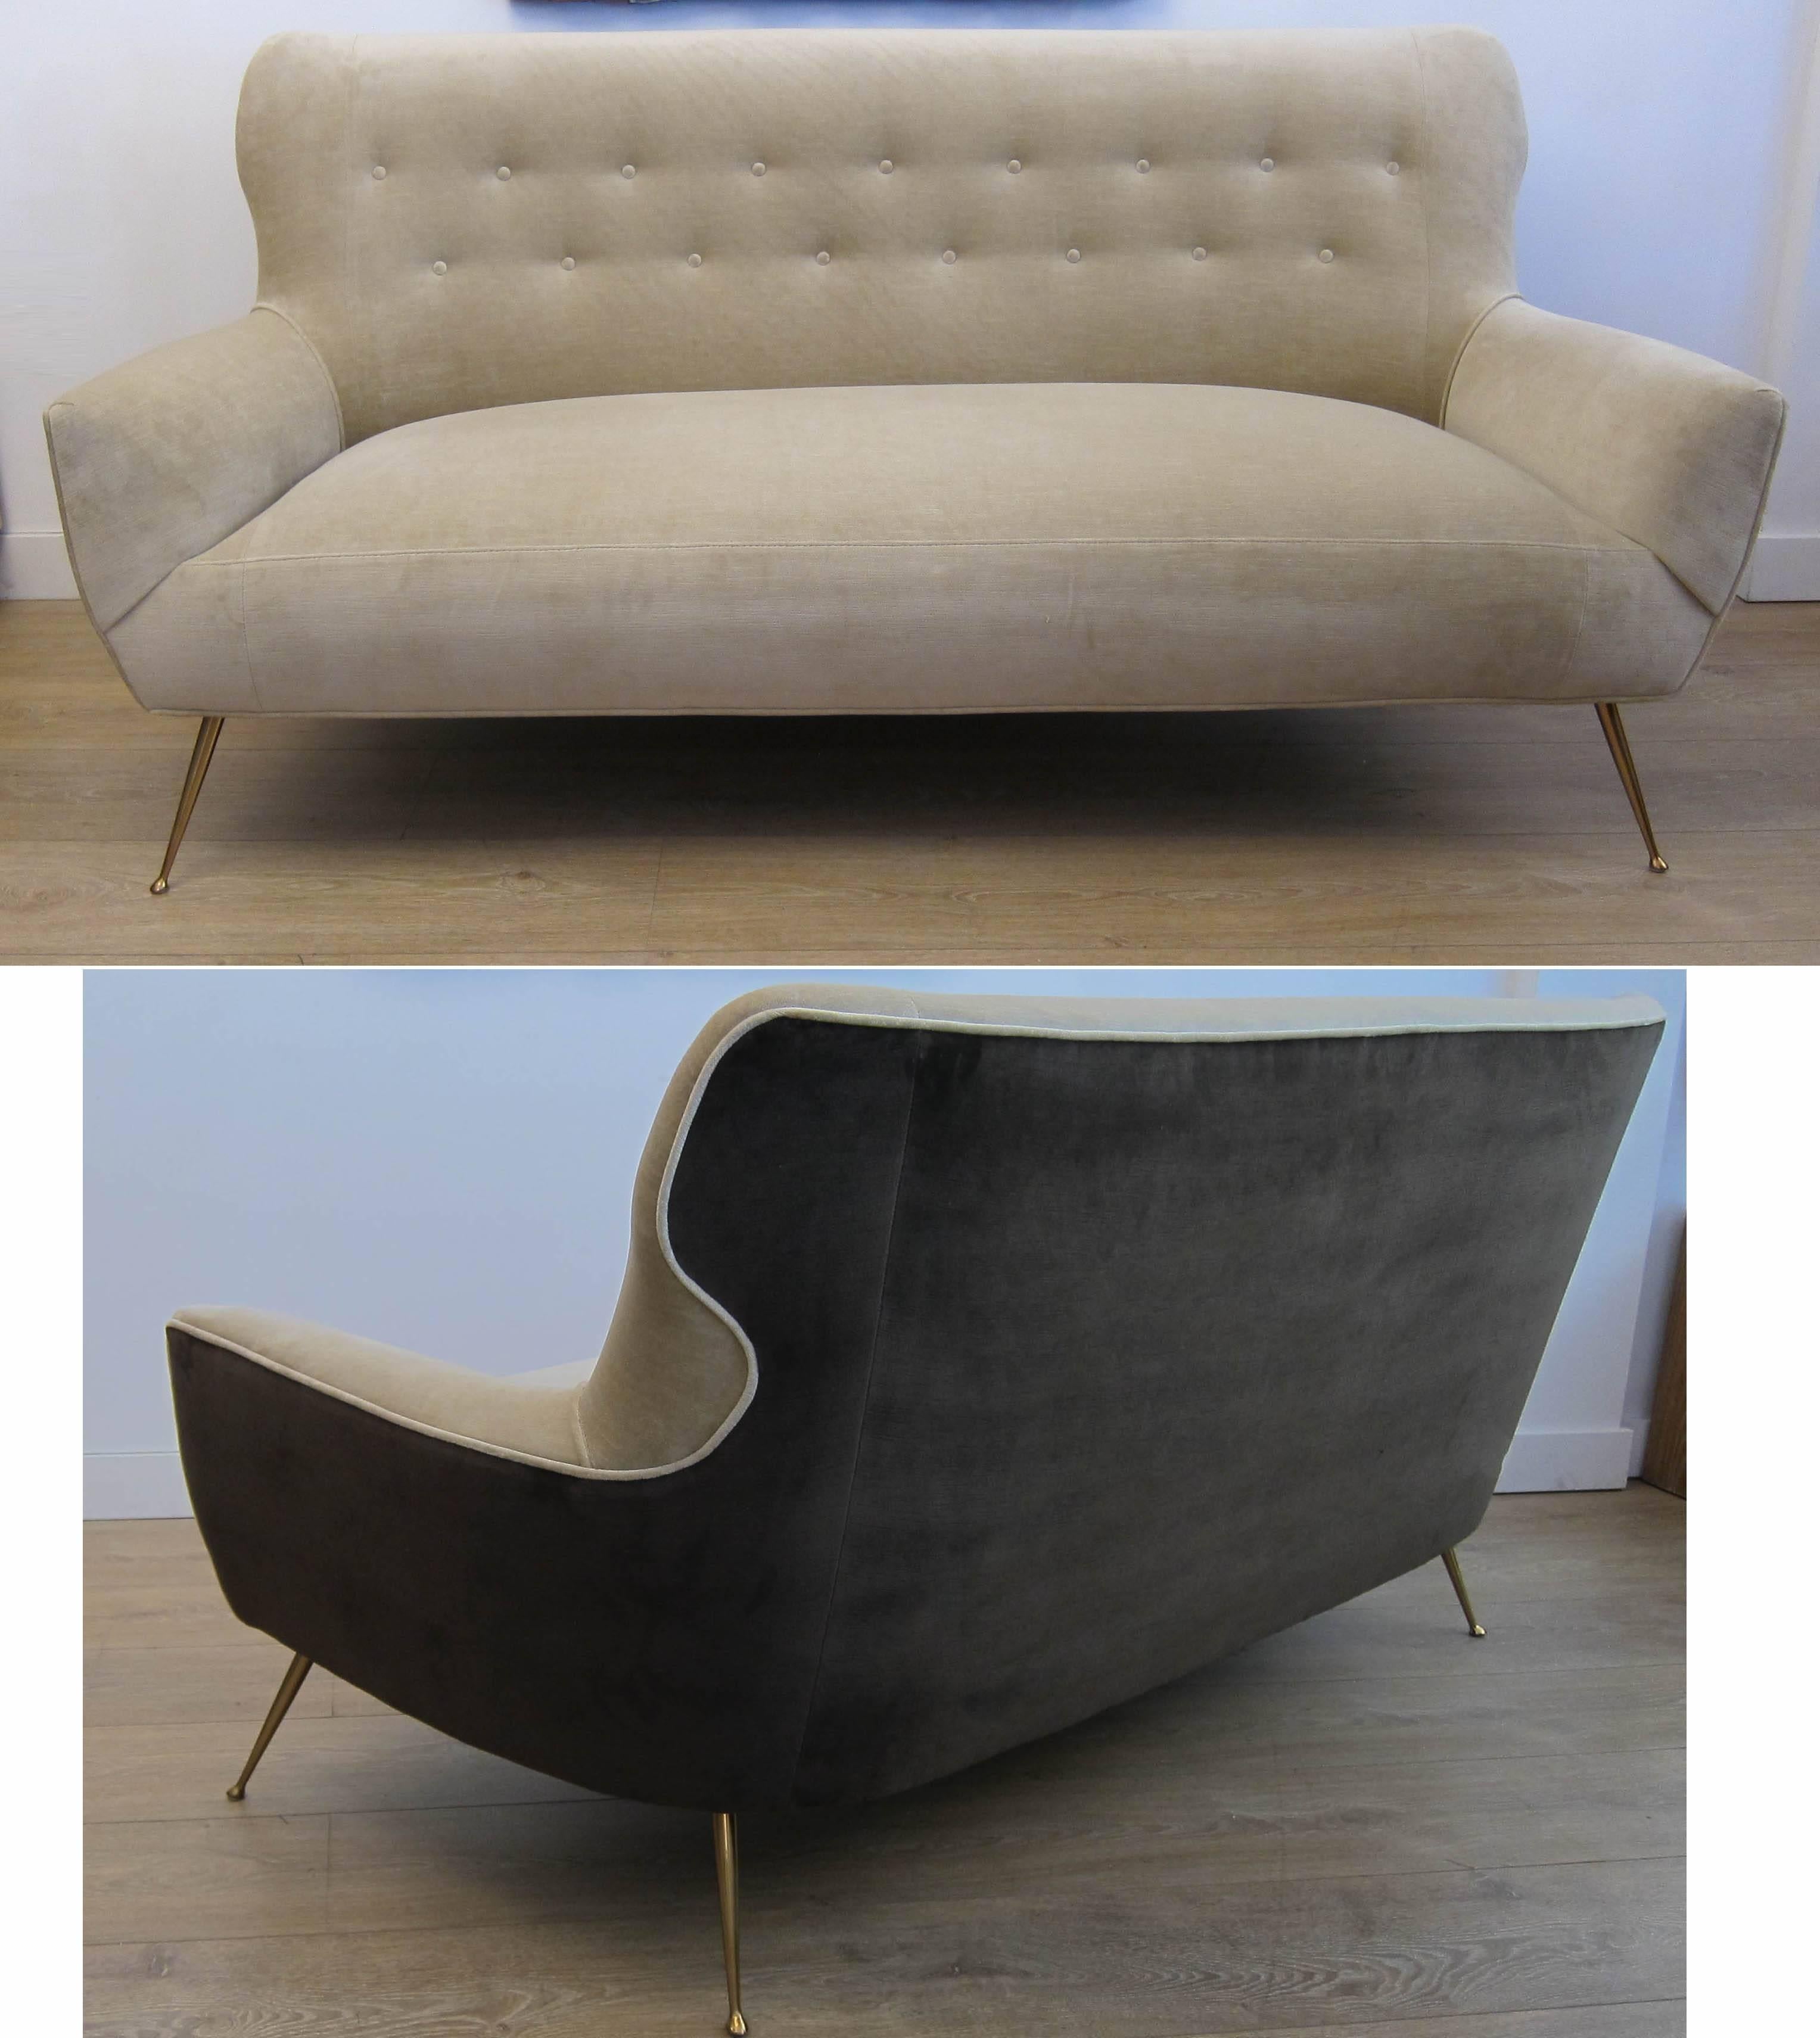 A curvaceous Italian sofa  newly upholstered in two tones velvet. Sleek brass legs (newly restored). Italy circa 1950. 

